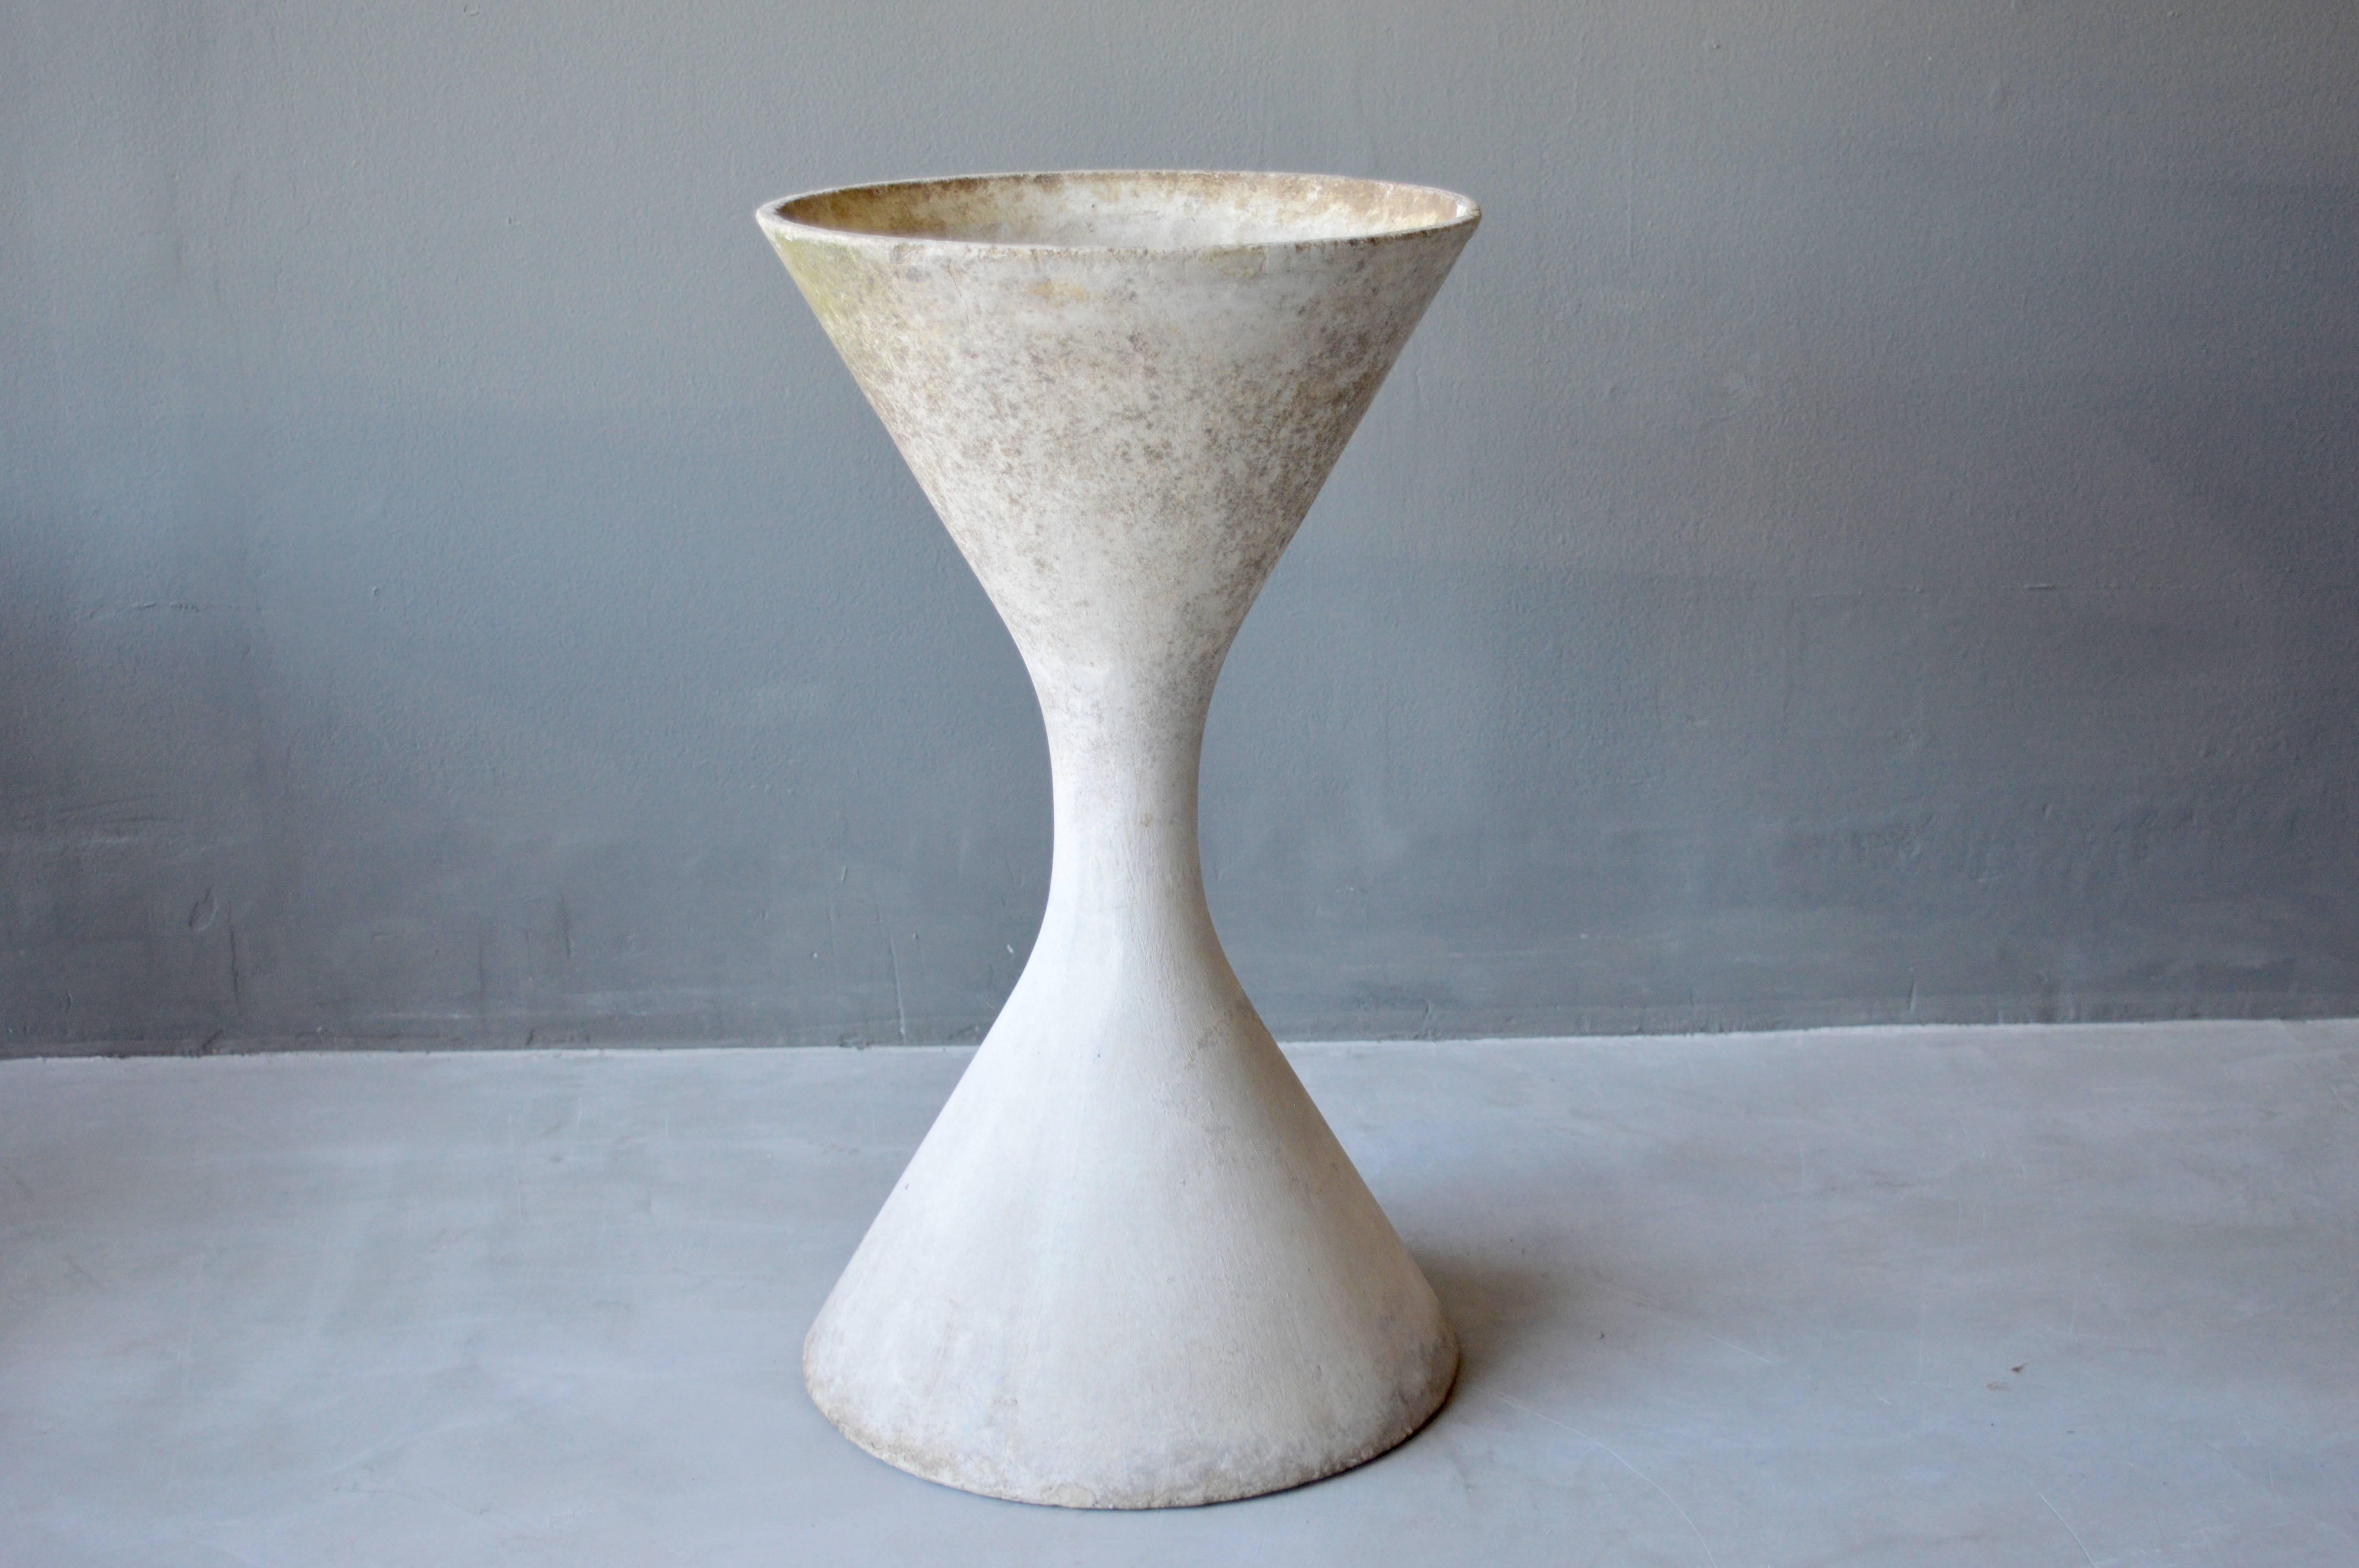 Elegant planter by Swiss architect Willy Guhl for Eternit. Cement planter is in excellent vintage condition. Great patina! Other Willy Guhl pieces available is separate listings.